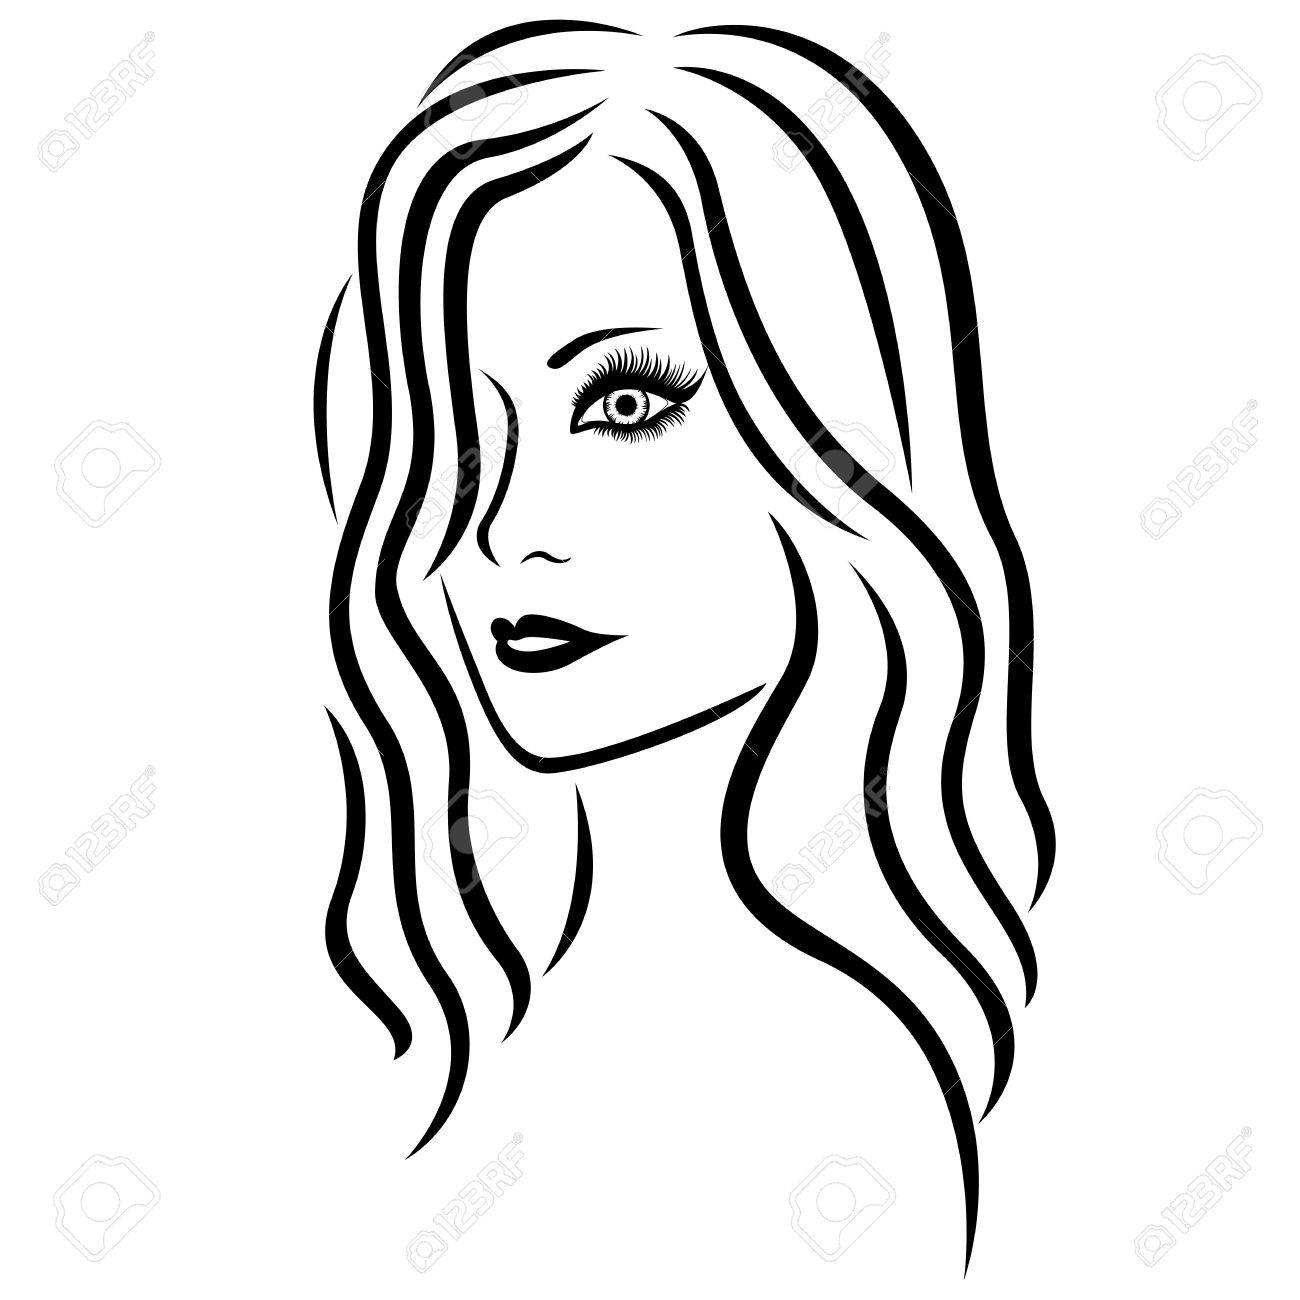 Head Outline Drawing at GetDrawings Free download